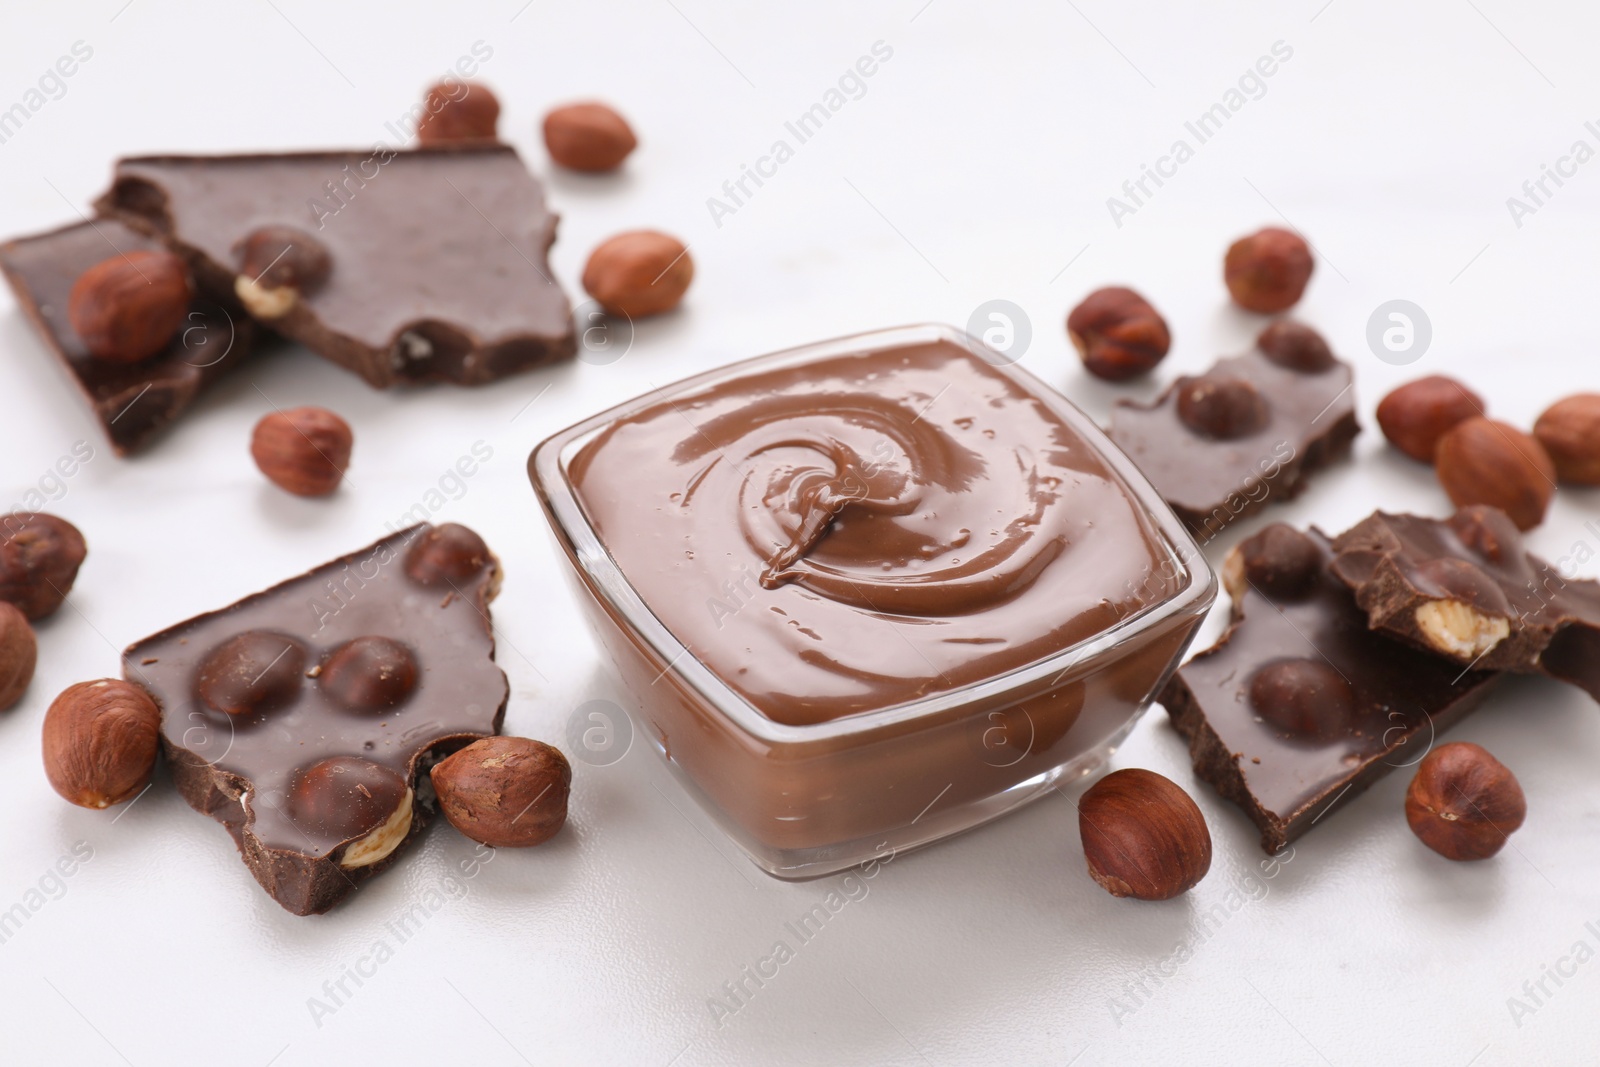 Photo of Bowl with tasty paste, chocolate pieces and nuts on white table